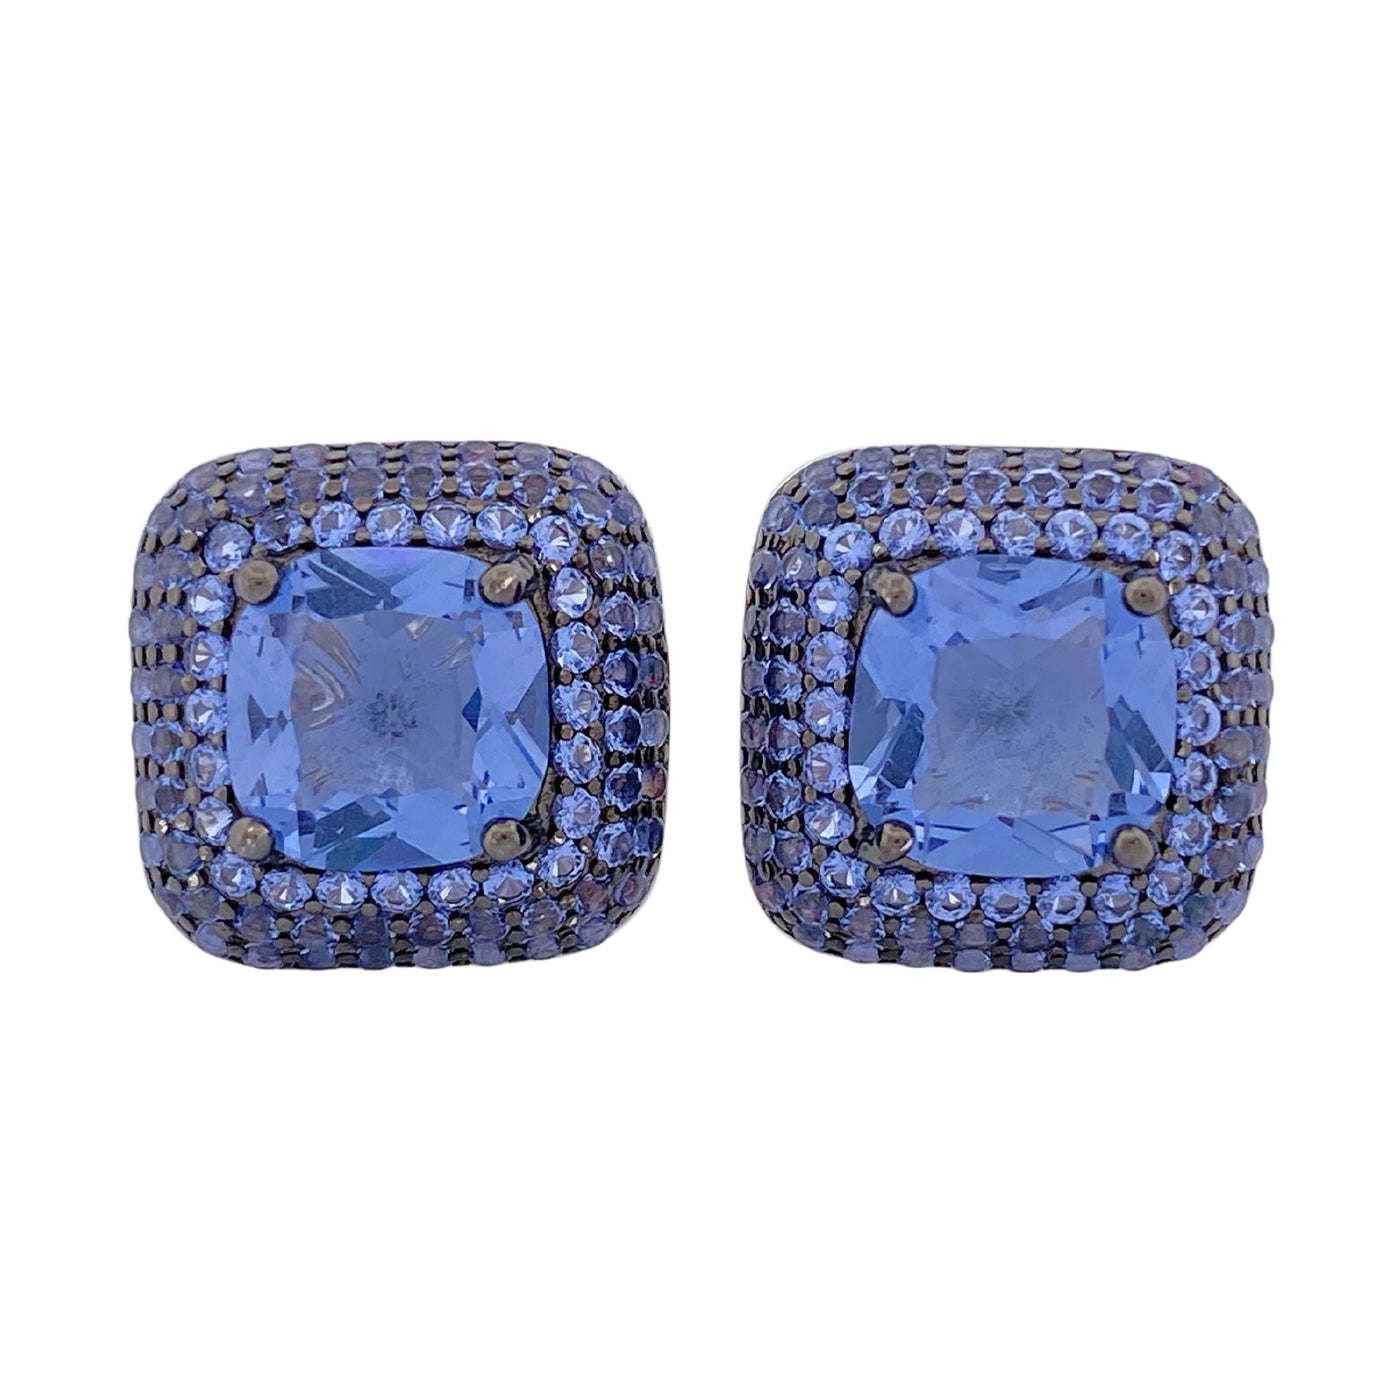 Silver earrings with zirconia square stone